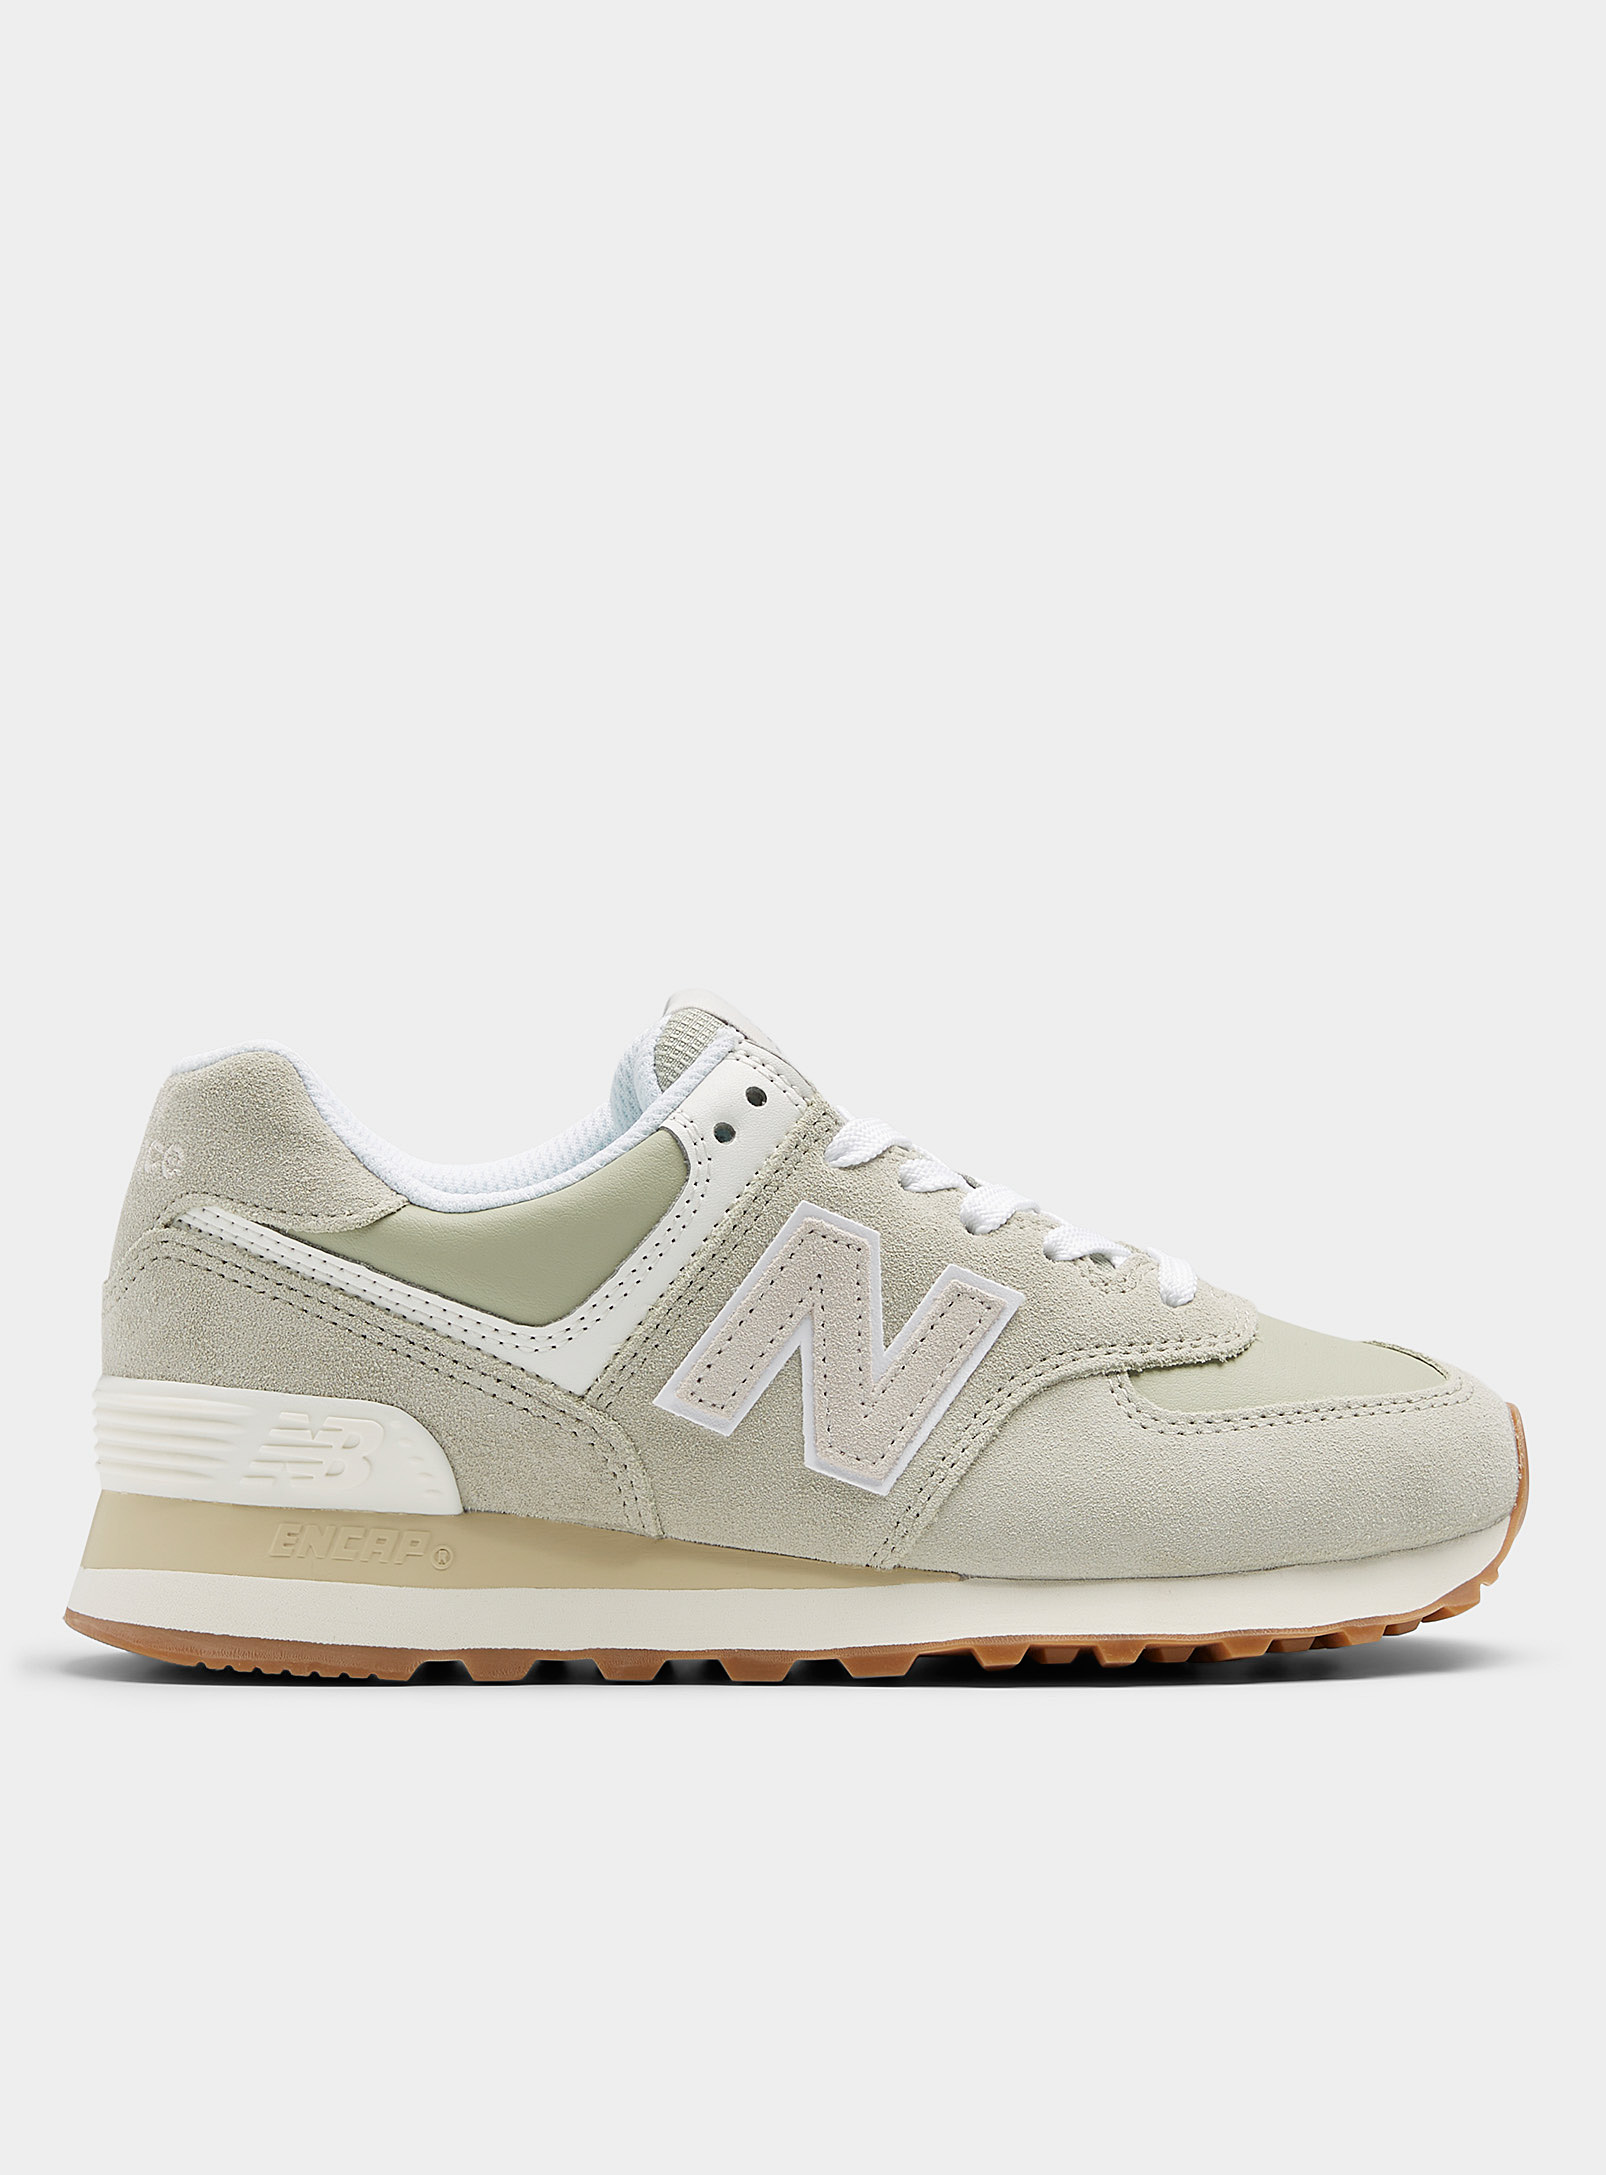 New Balance - Chaussures Le Sneaker 574 olivine Femme